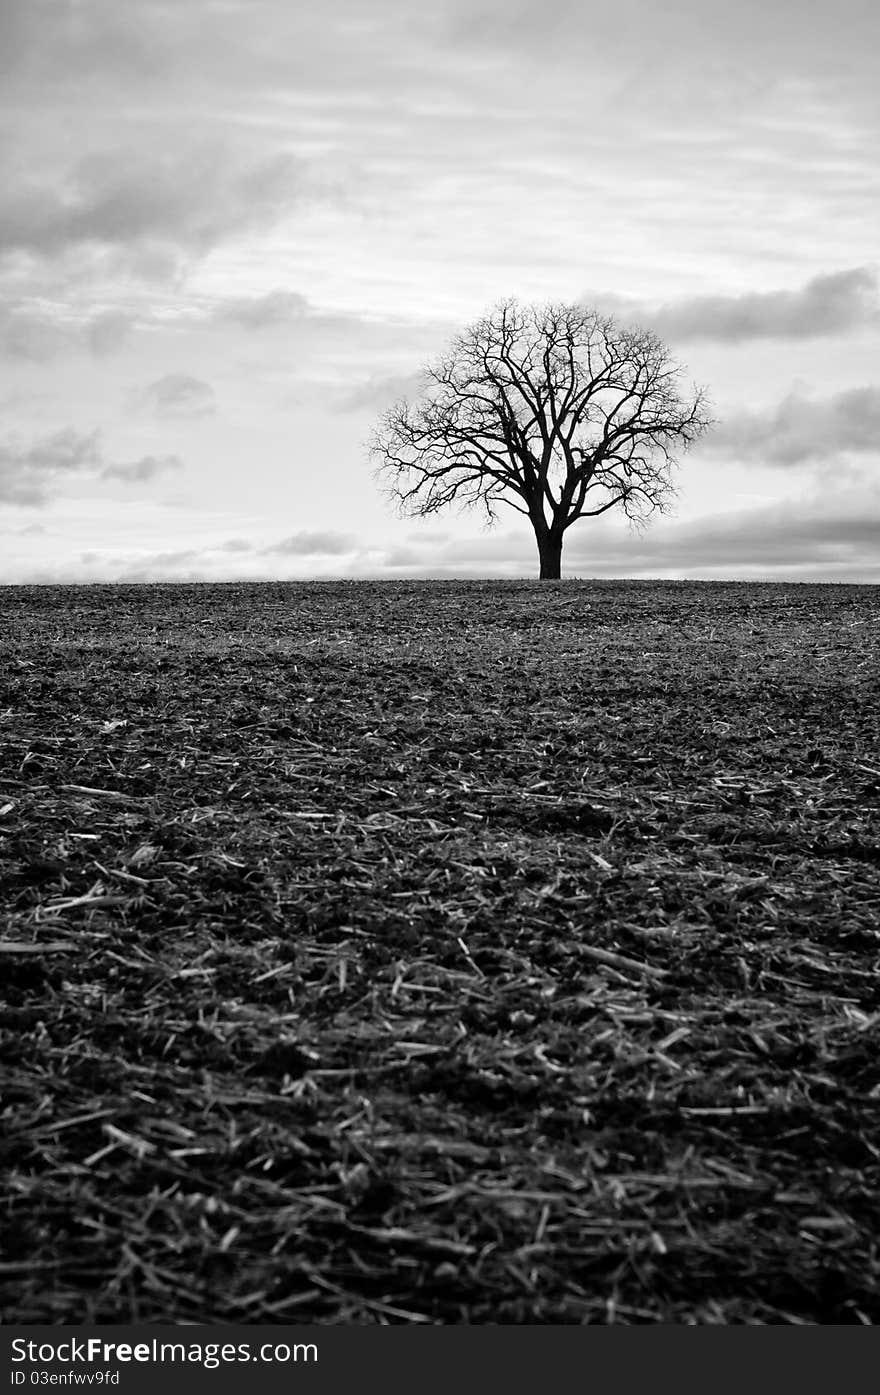 A black and white photo of a single tree standing in an empty farm field in autumn. A black and white photo of a single tree standing in an empty farm field in autumn.